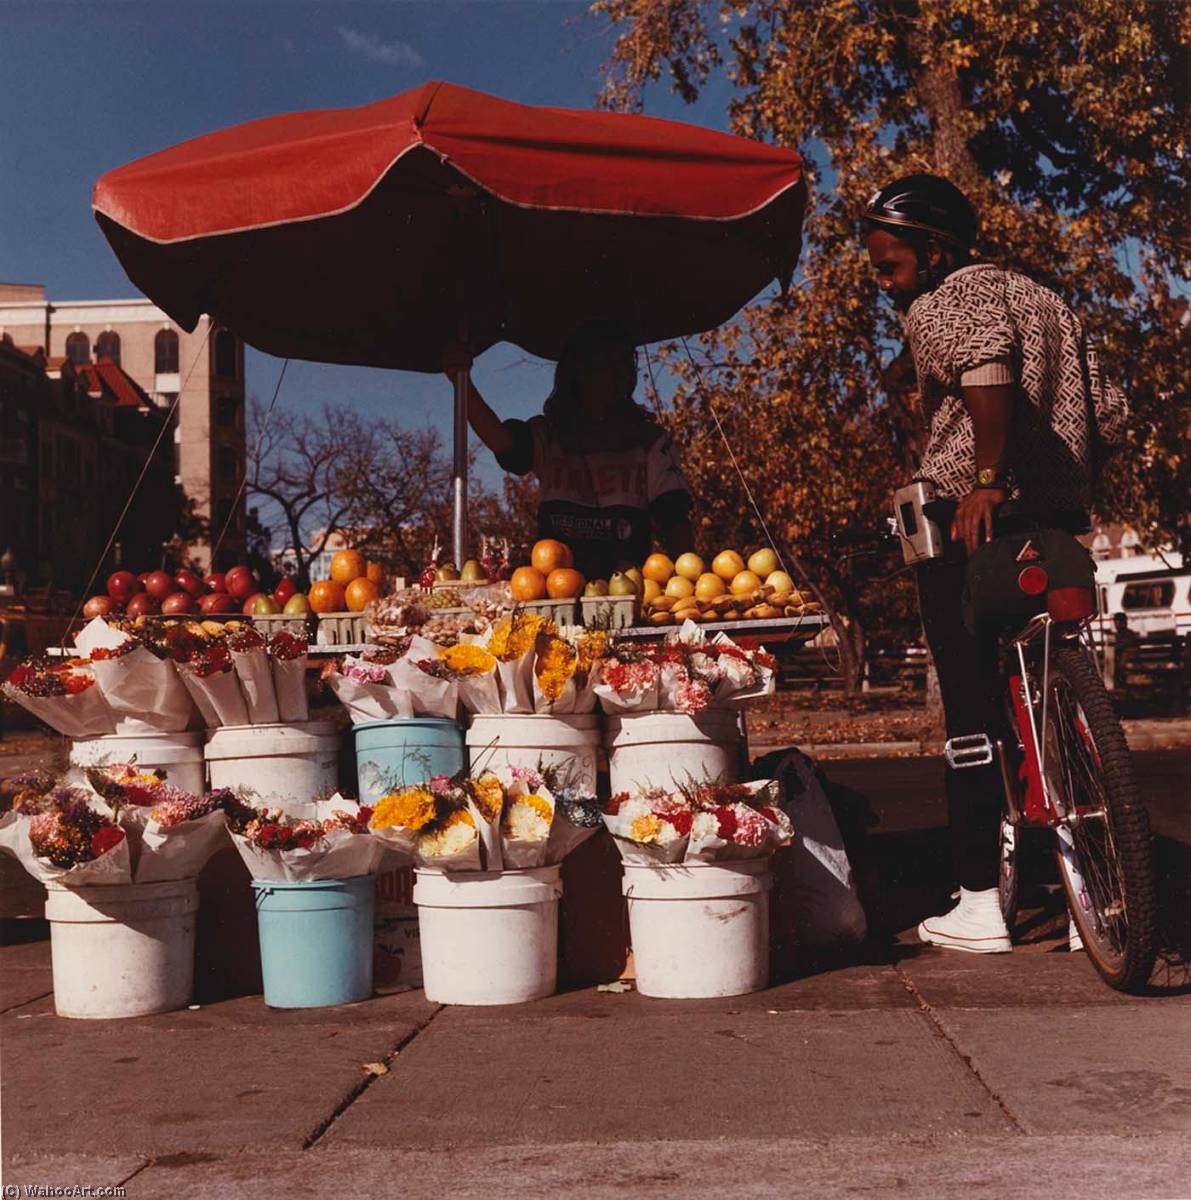 WikiOO.org - 백과 사전 - 회화, 삽화 Brian V Jones - Fruit Seller with man on bicycle, from the series Connecticut Avenue